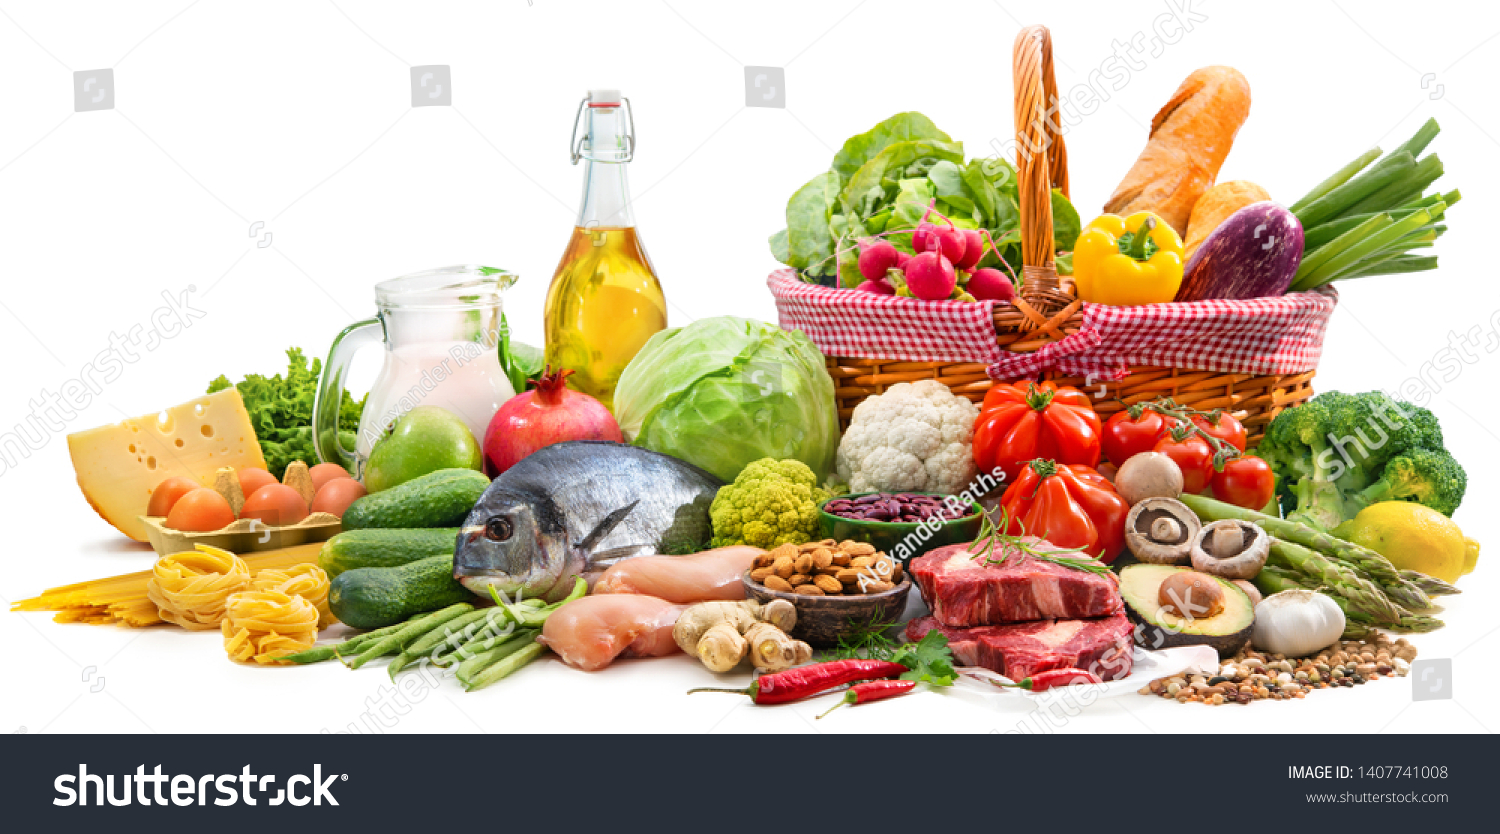 Balanced diet food background. Selection of various paleo diet products for healthy nutrition  #1407741008